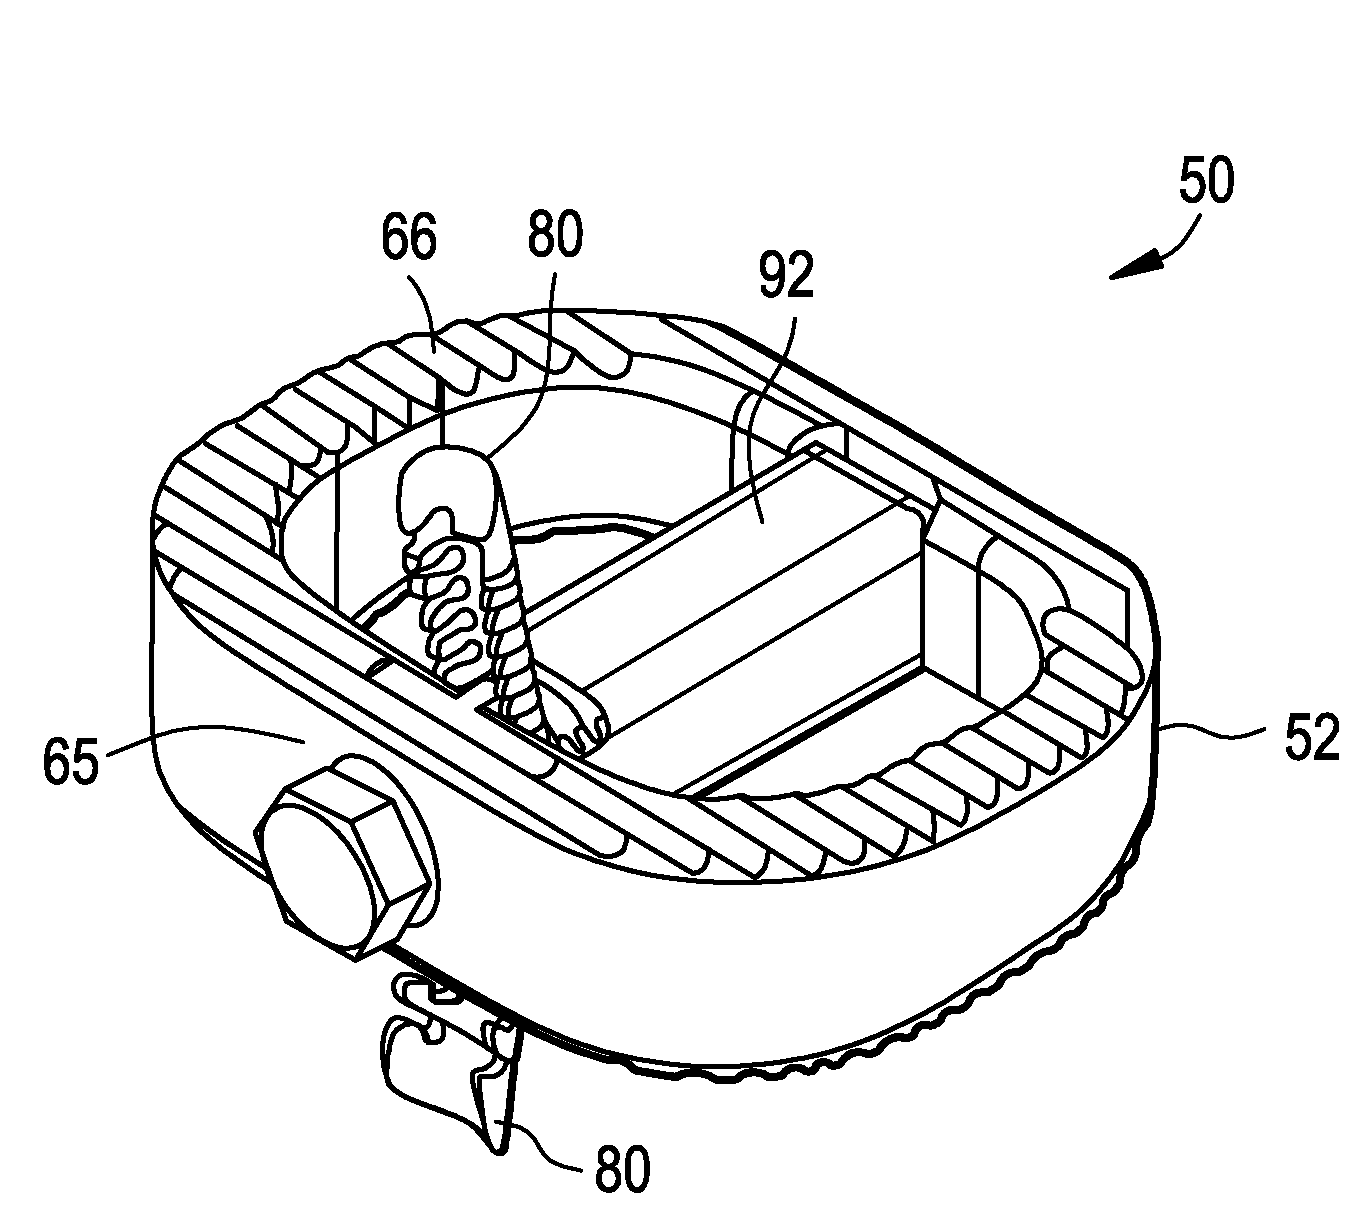 Interbody fusion device and method of operation